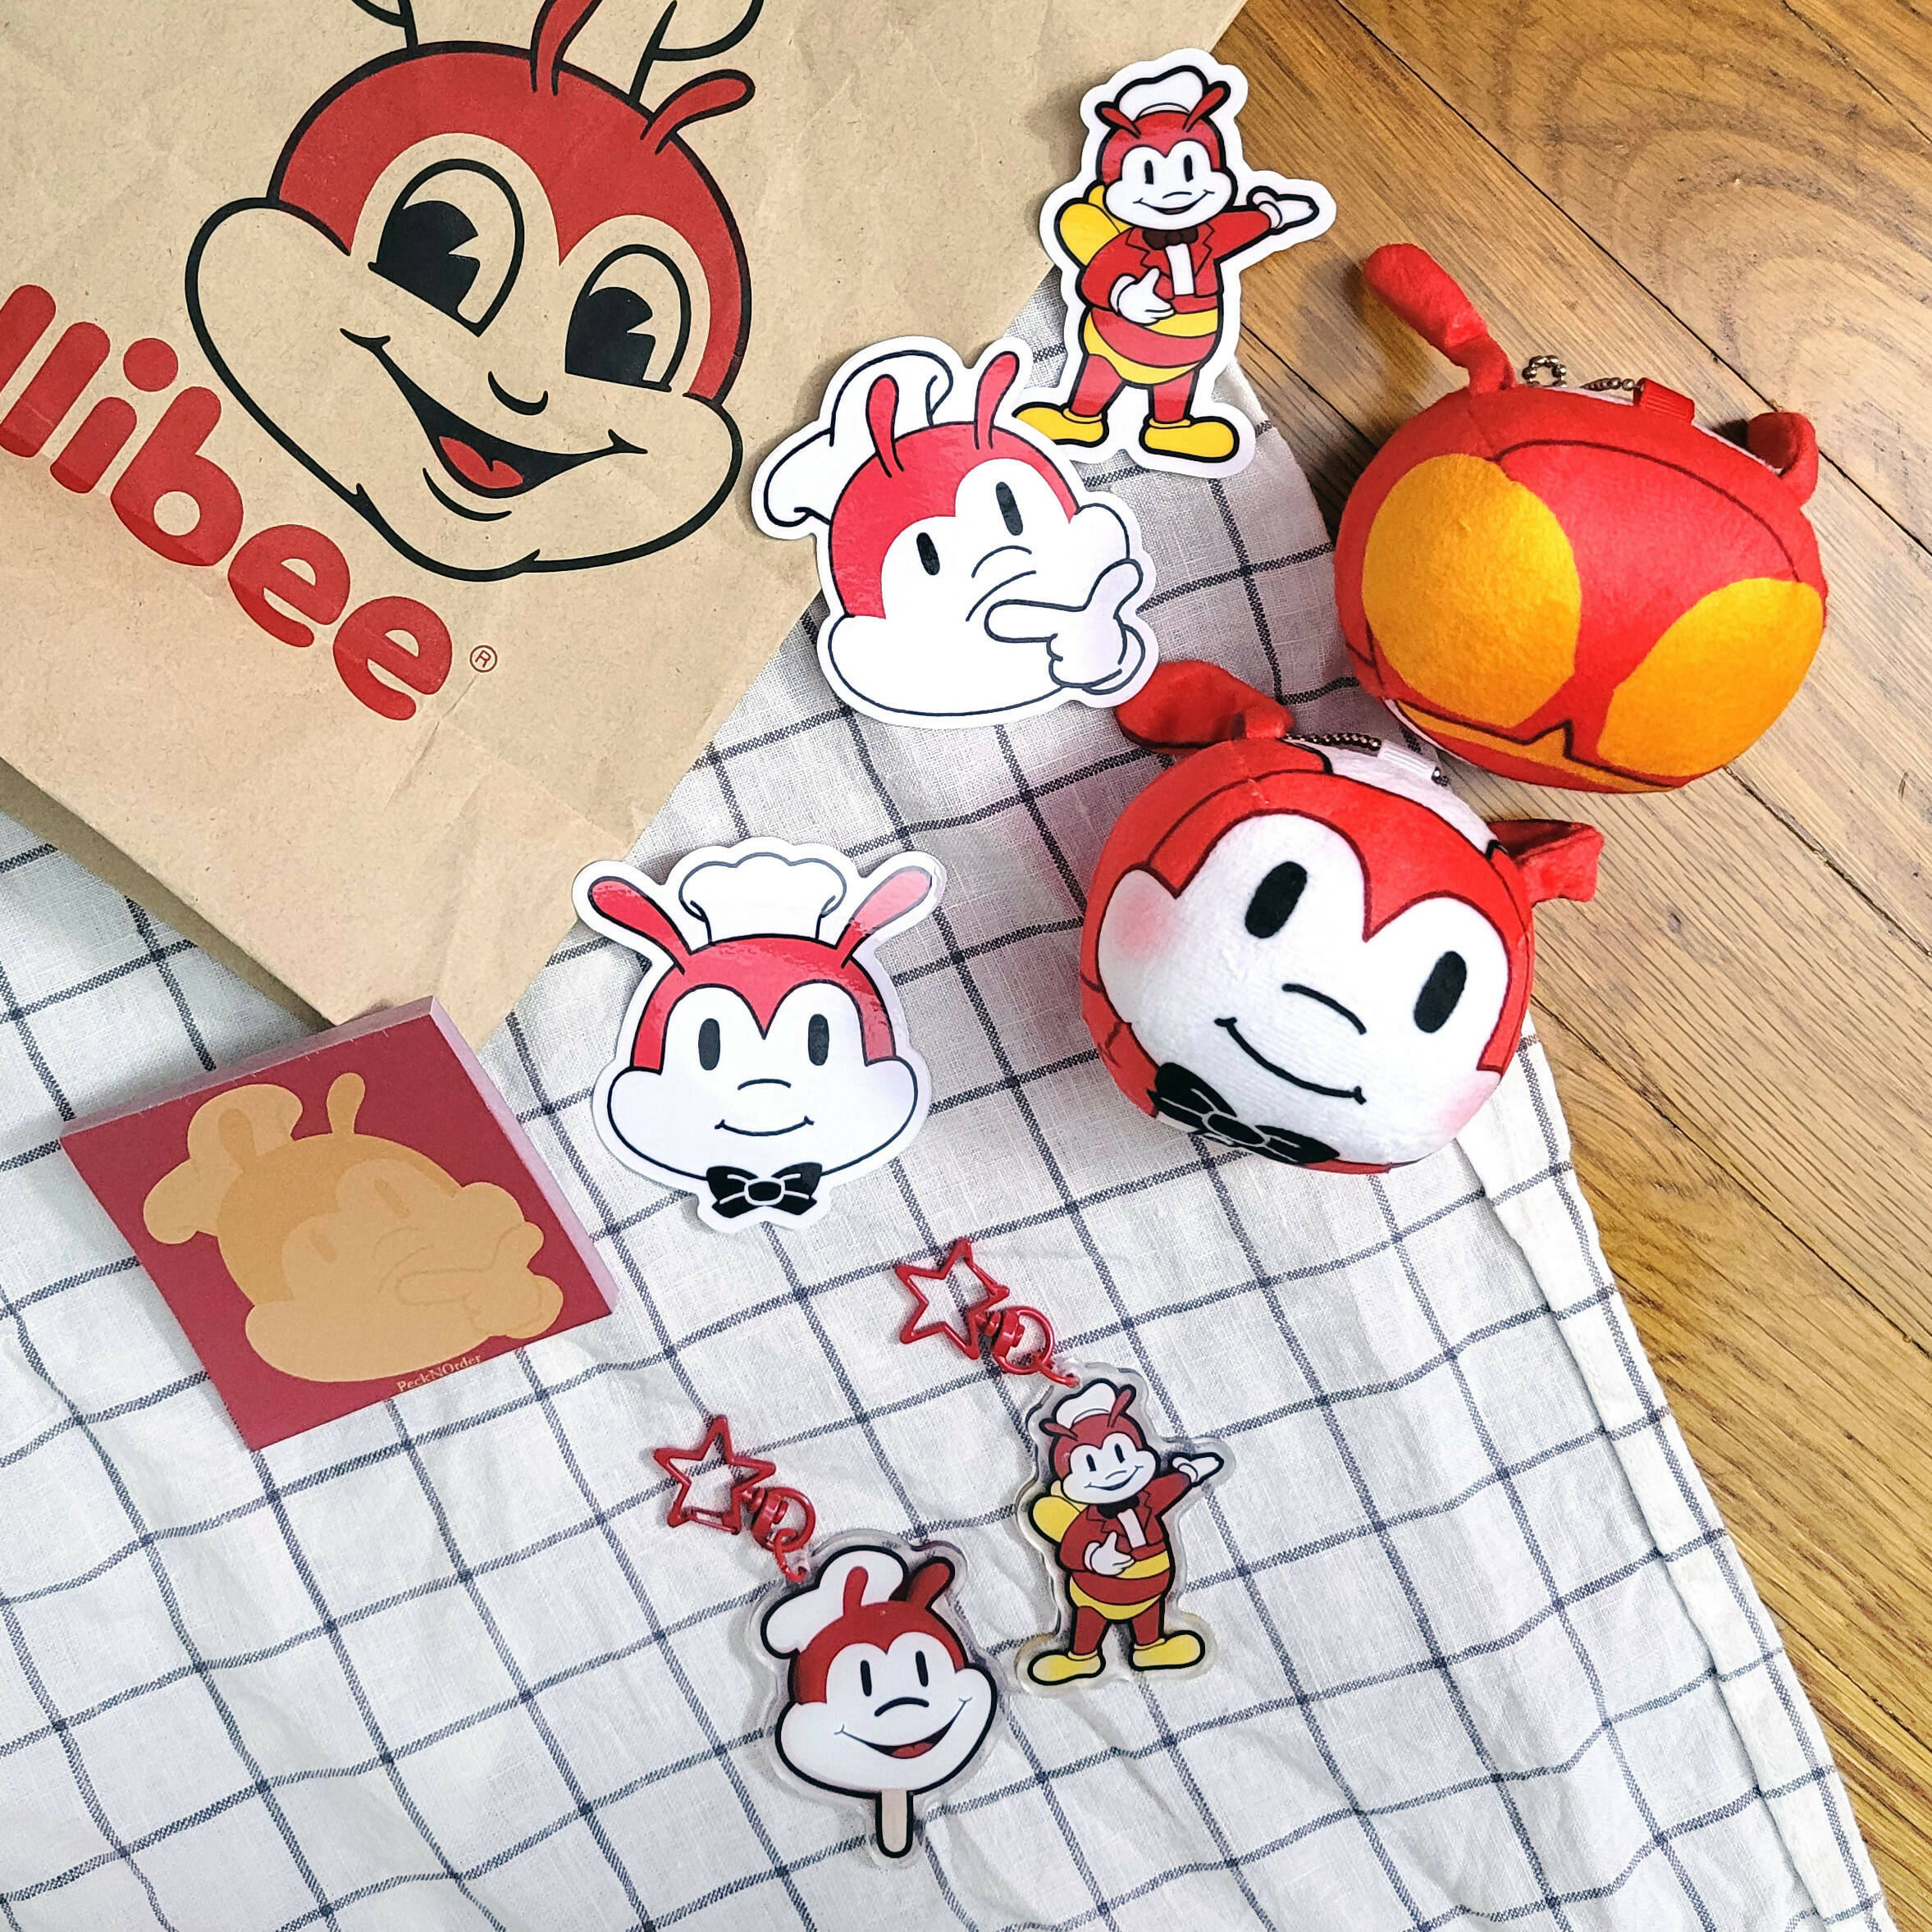 Thinking Red Jolly Bee Fast Food Mascot Stationery Memo Pad